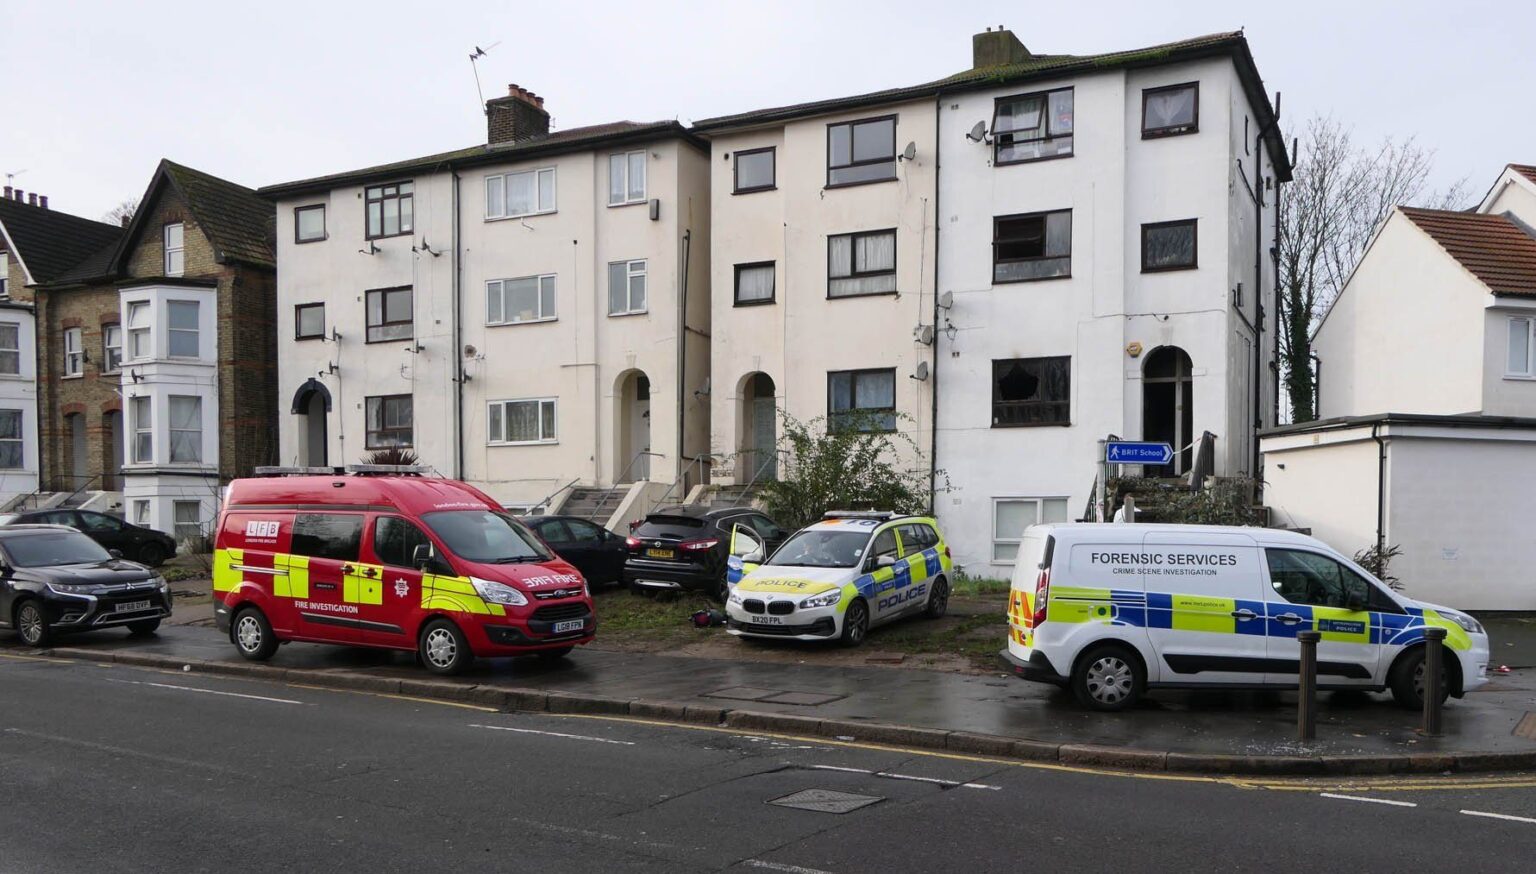 Woman dies in London flat fire in early hours of Christmas Eve